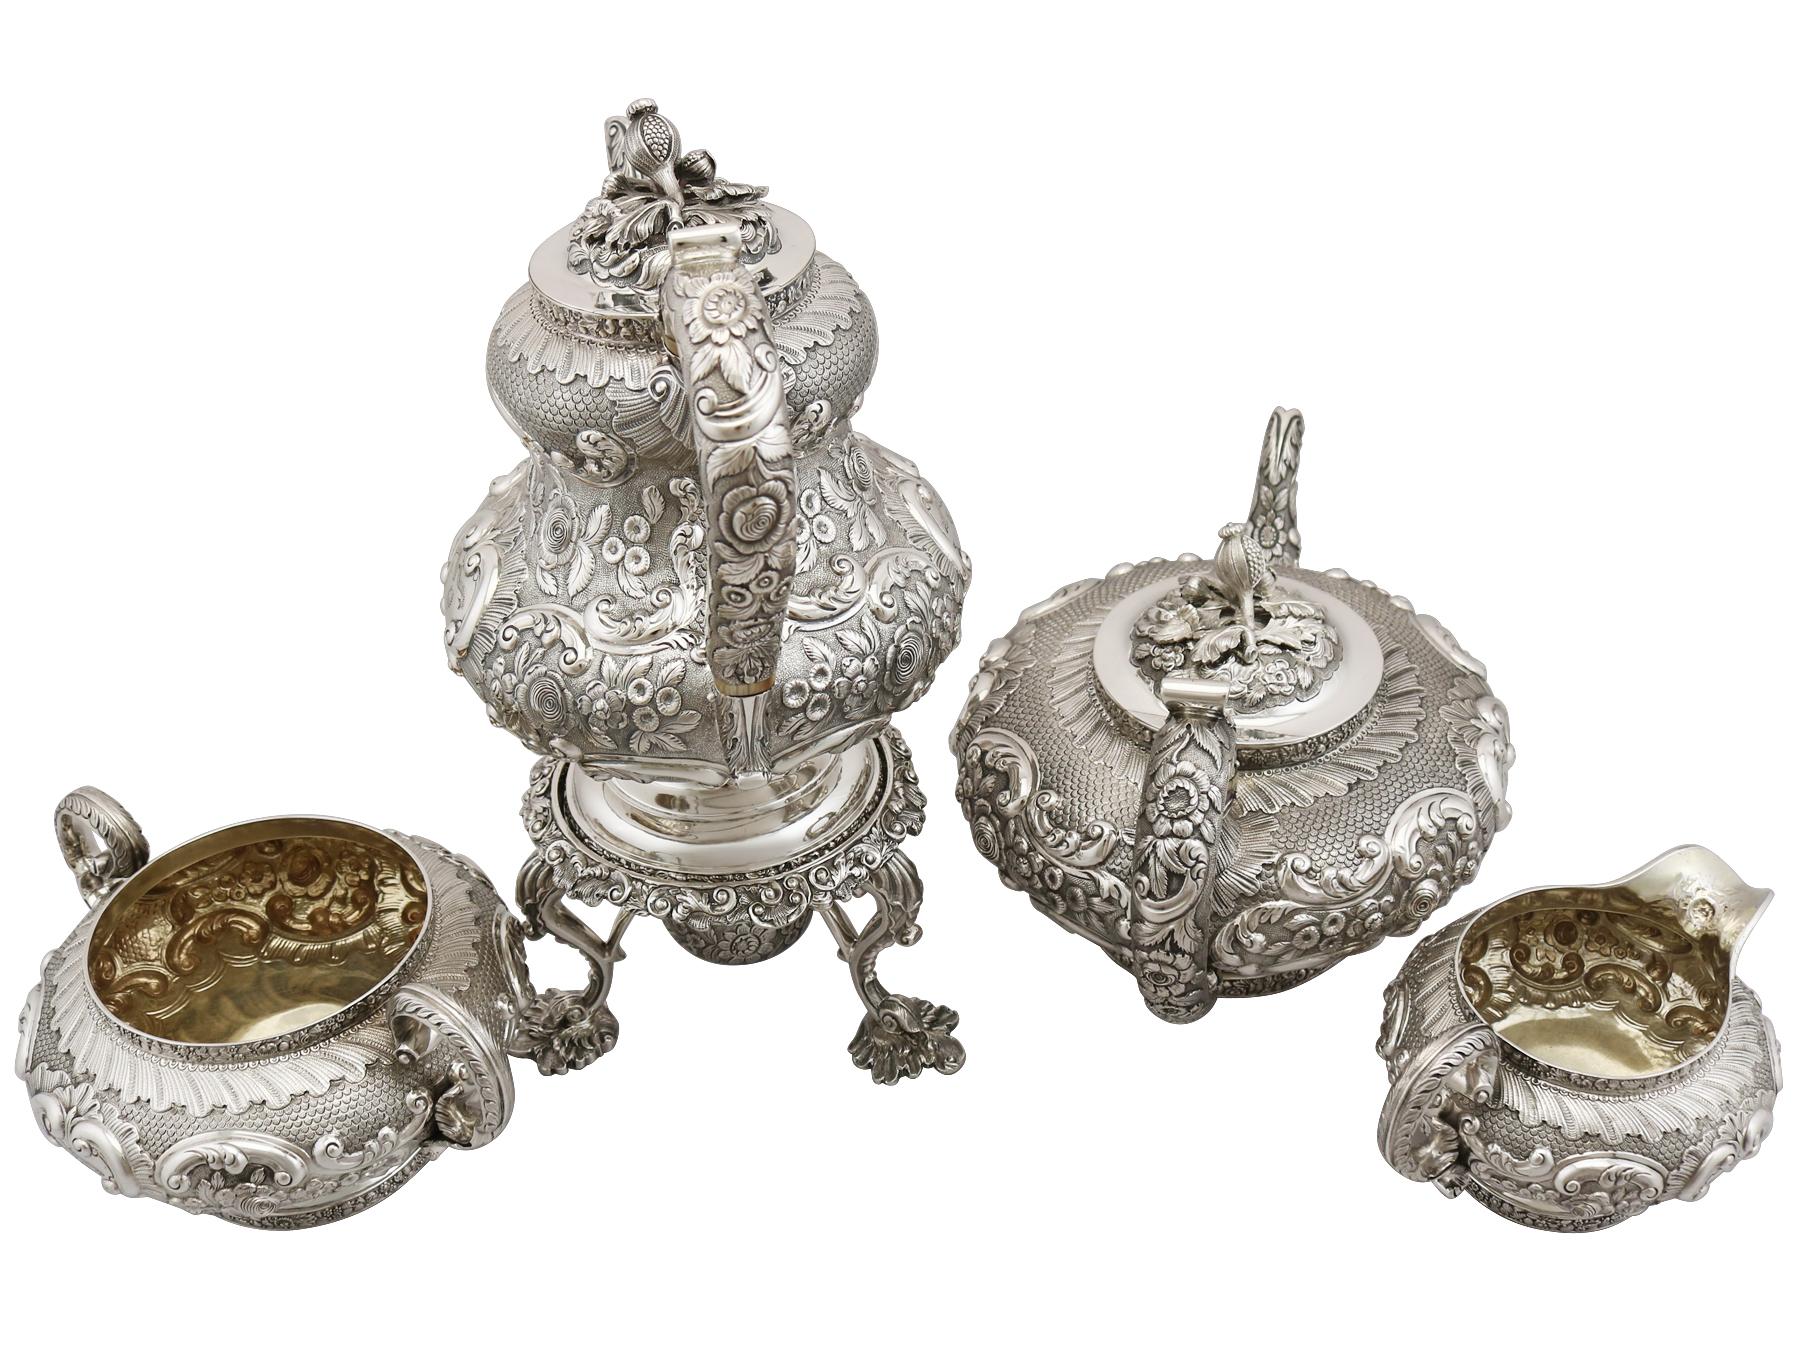 A magnificent, fine and impressive antique George IV English sterling silver four piece tea and coffee set/service; part of our silver Teaware collection.

This magnificent antique silver tea set, in sterling standard, consists of a coffee pot